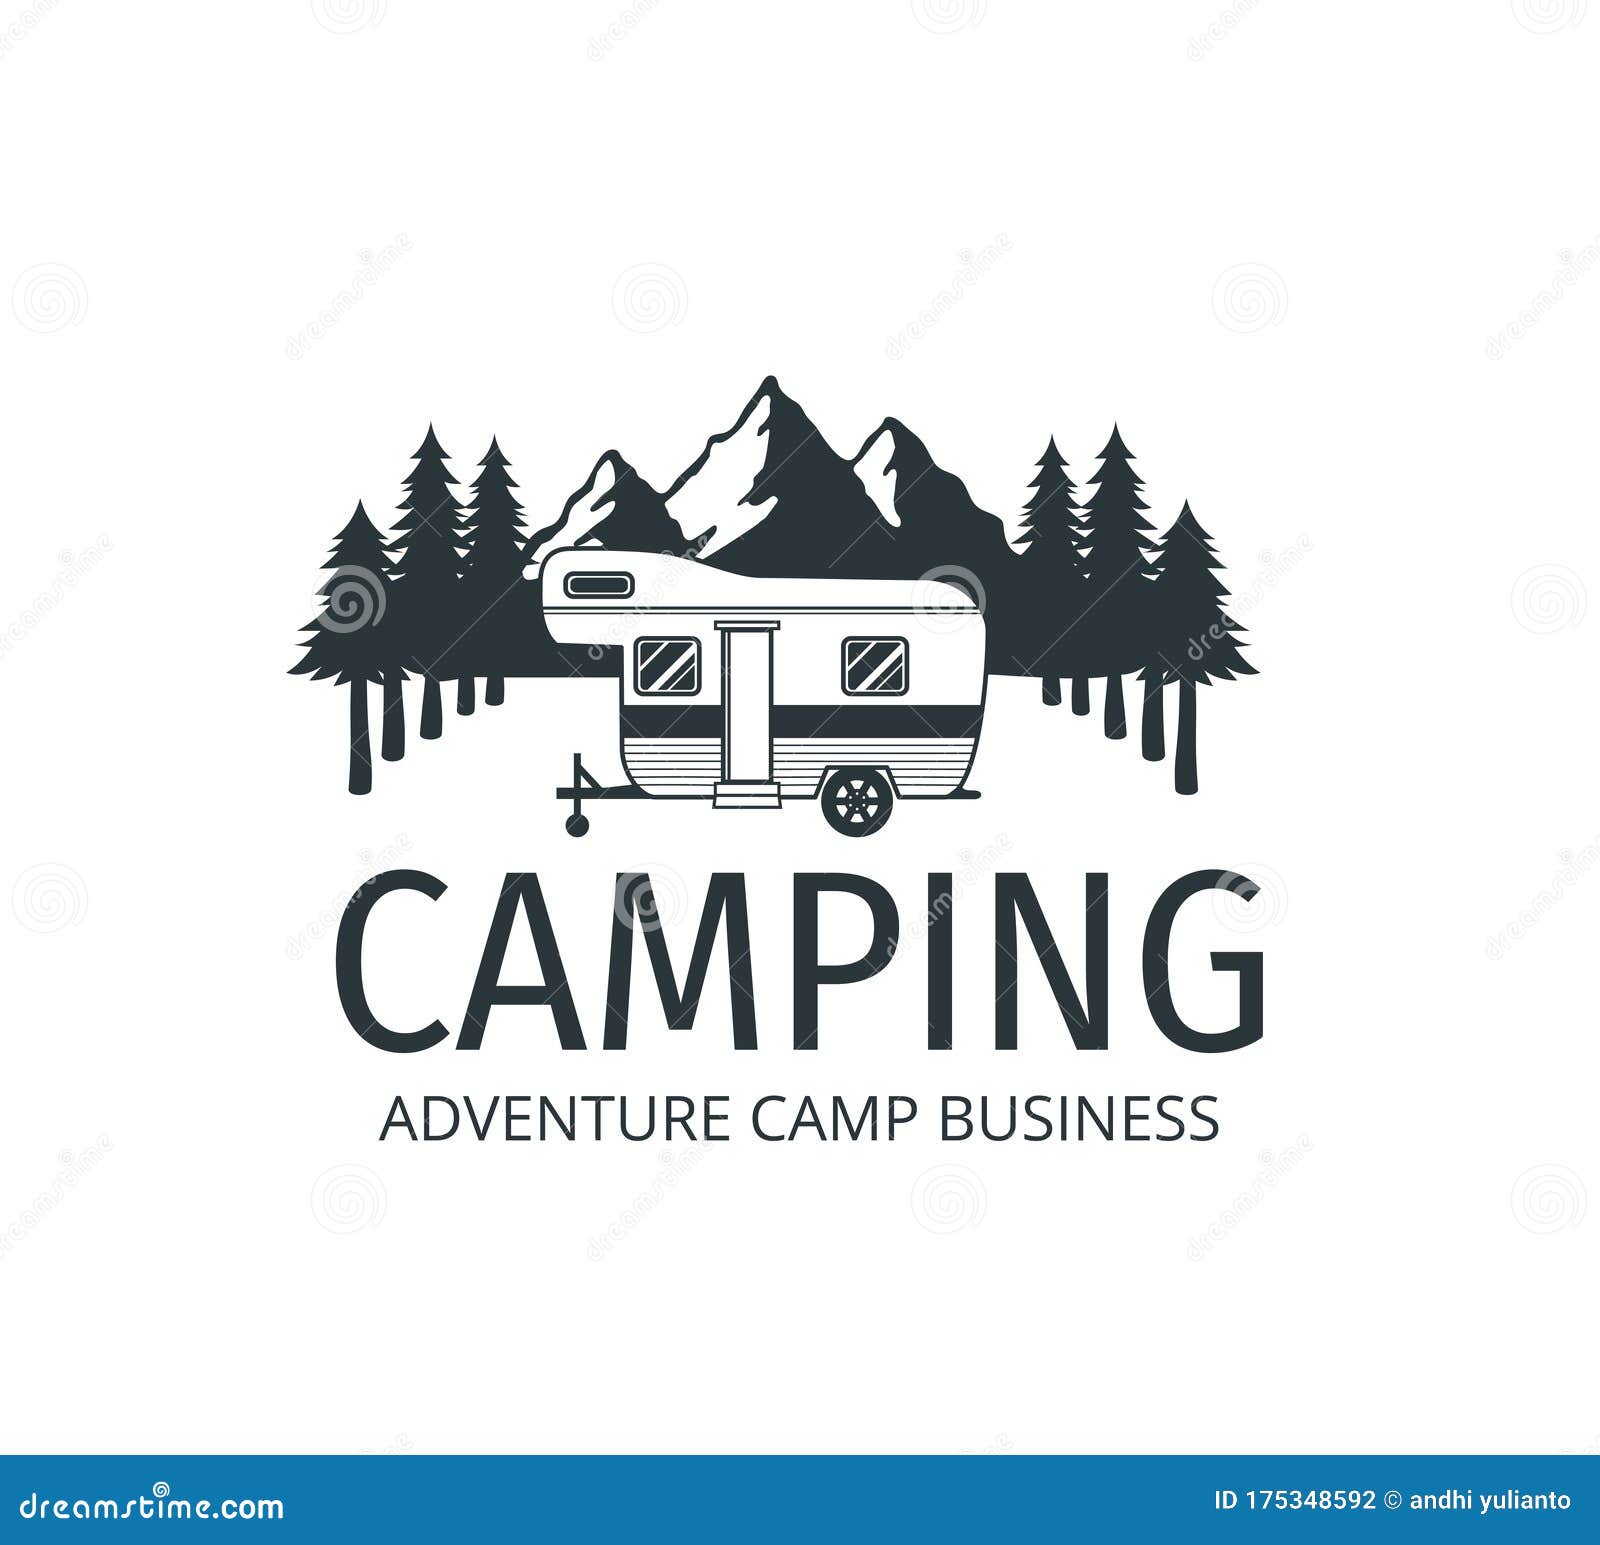 Camping Car Trailer in the Middle of Jungle of Pine Trees for Outdoor ...